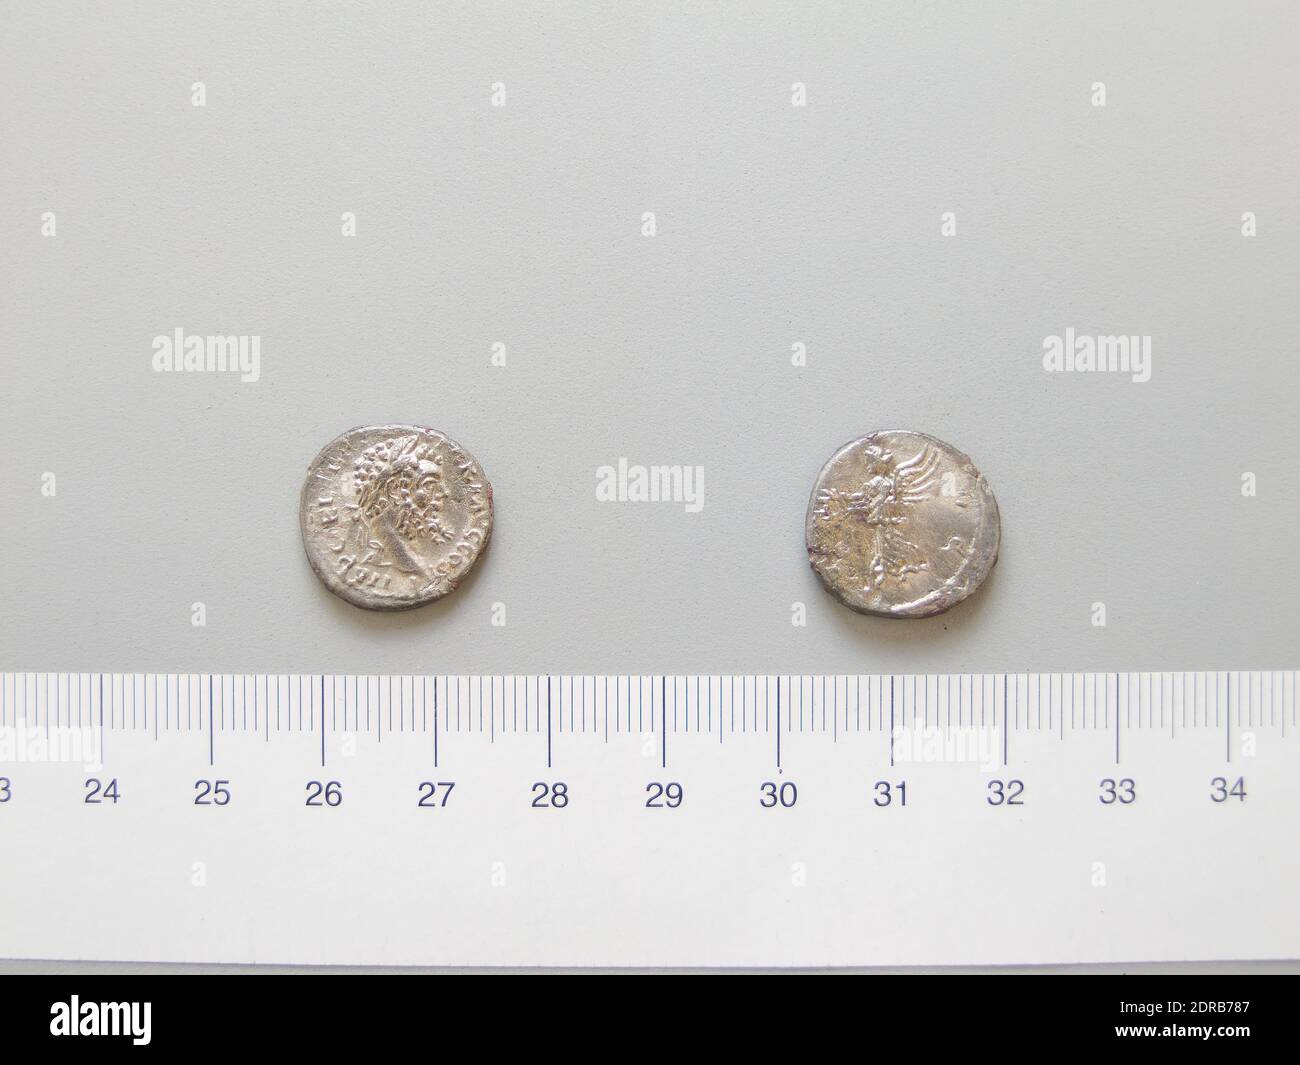 Ruler: Septimius Severus, Emperor of Rome, A.D. 146–211, ruled 193–211, Mint: East, Denarius of Septimius Severus, Emperor of Rome from East, 194–95, Silver, 1.99 g, 5:00, 17.5 mm, Made in East, Roman, 2nd century A.D., Numismatics Stock Photo